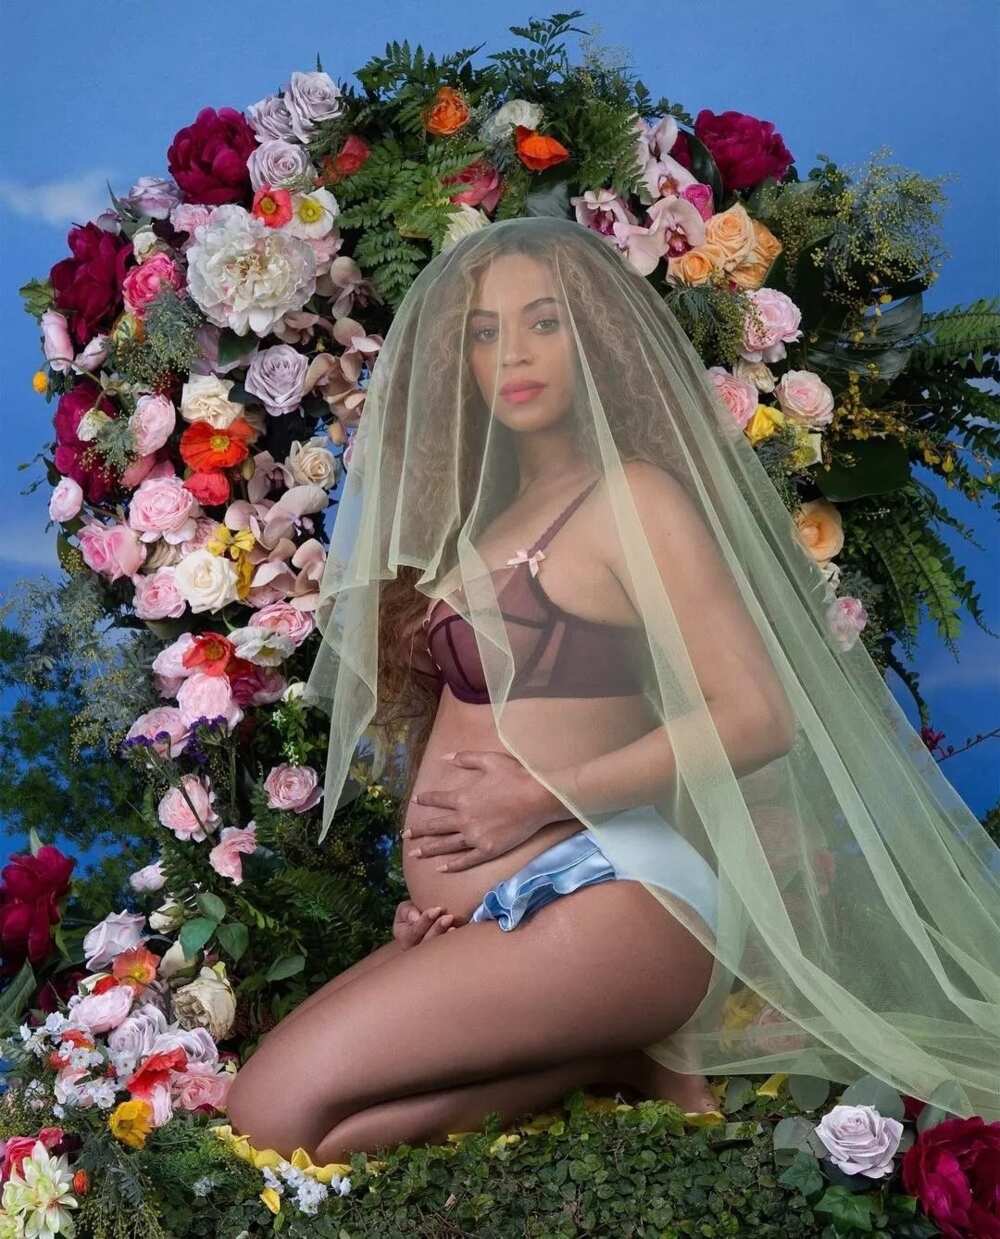 Beyonce is pregnant